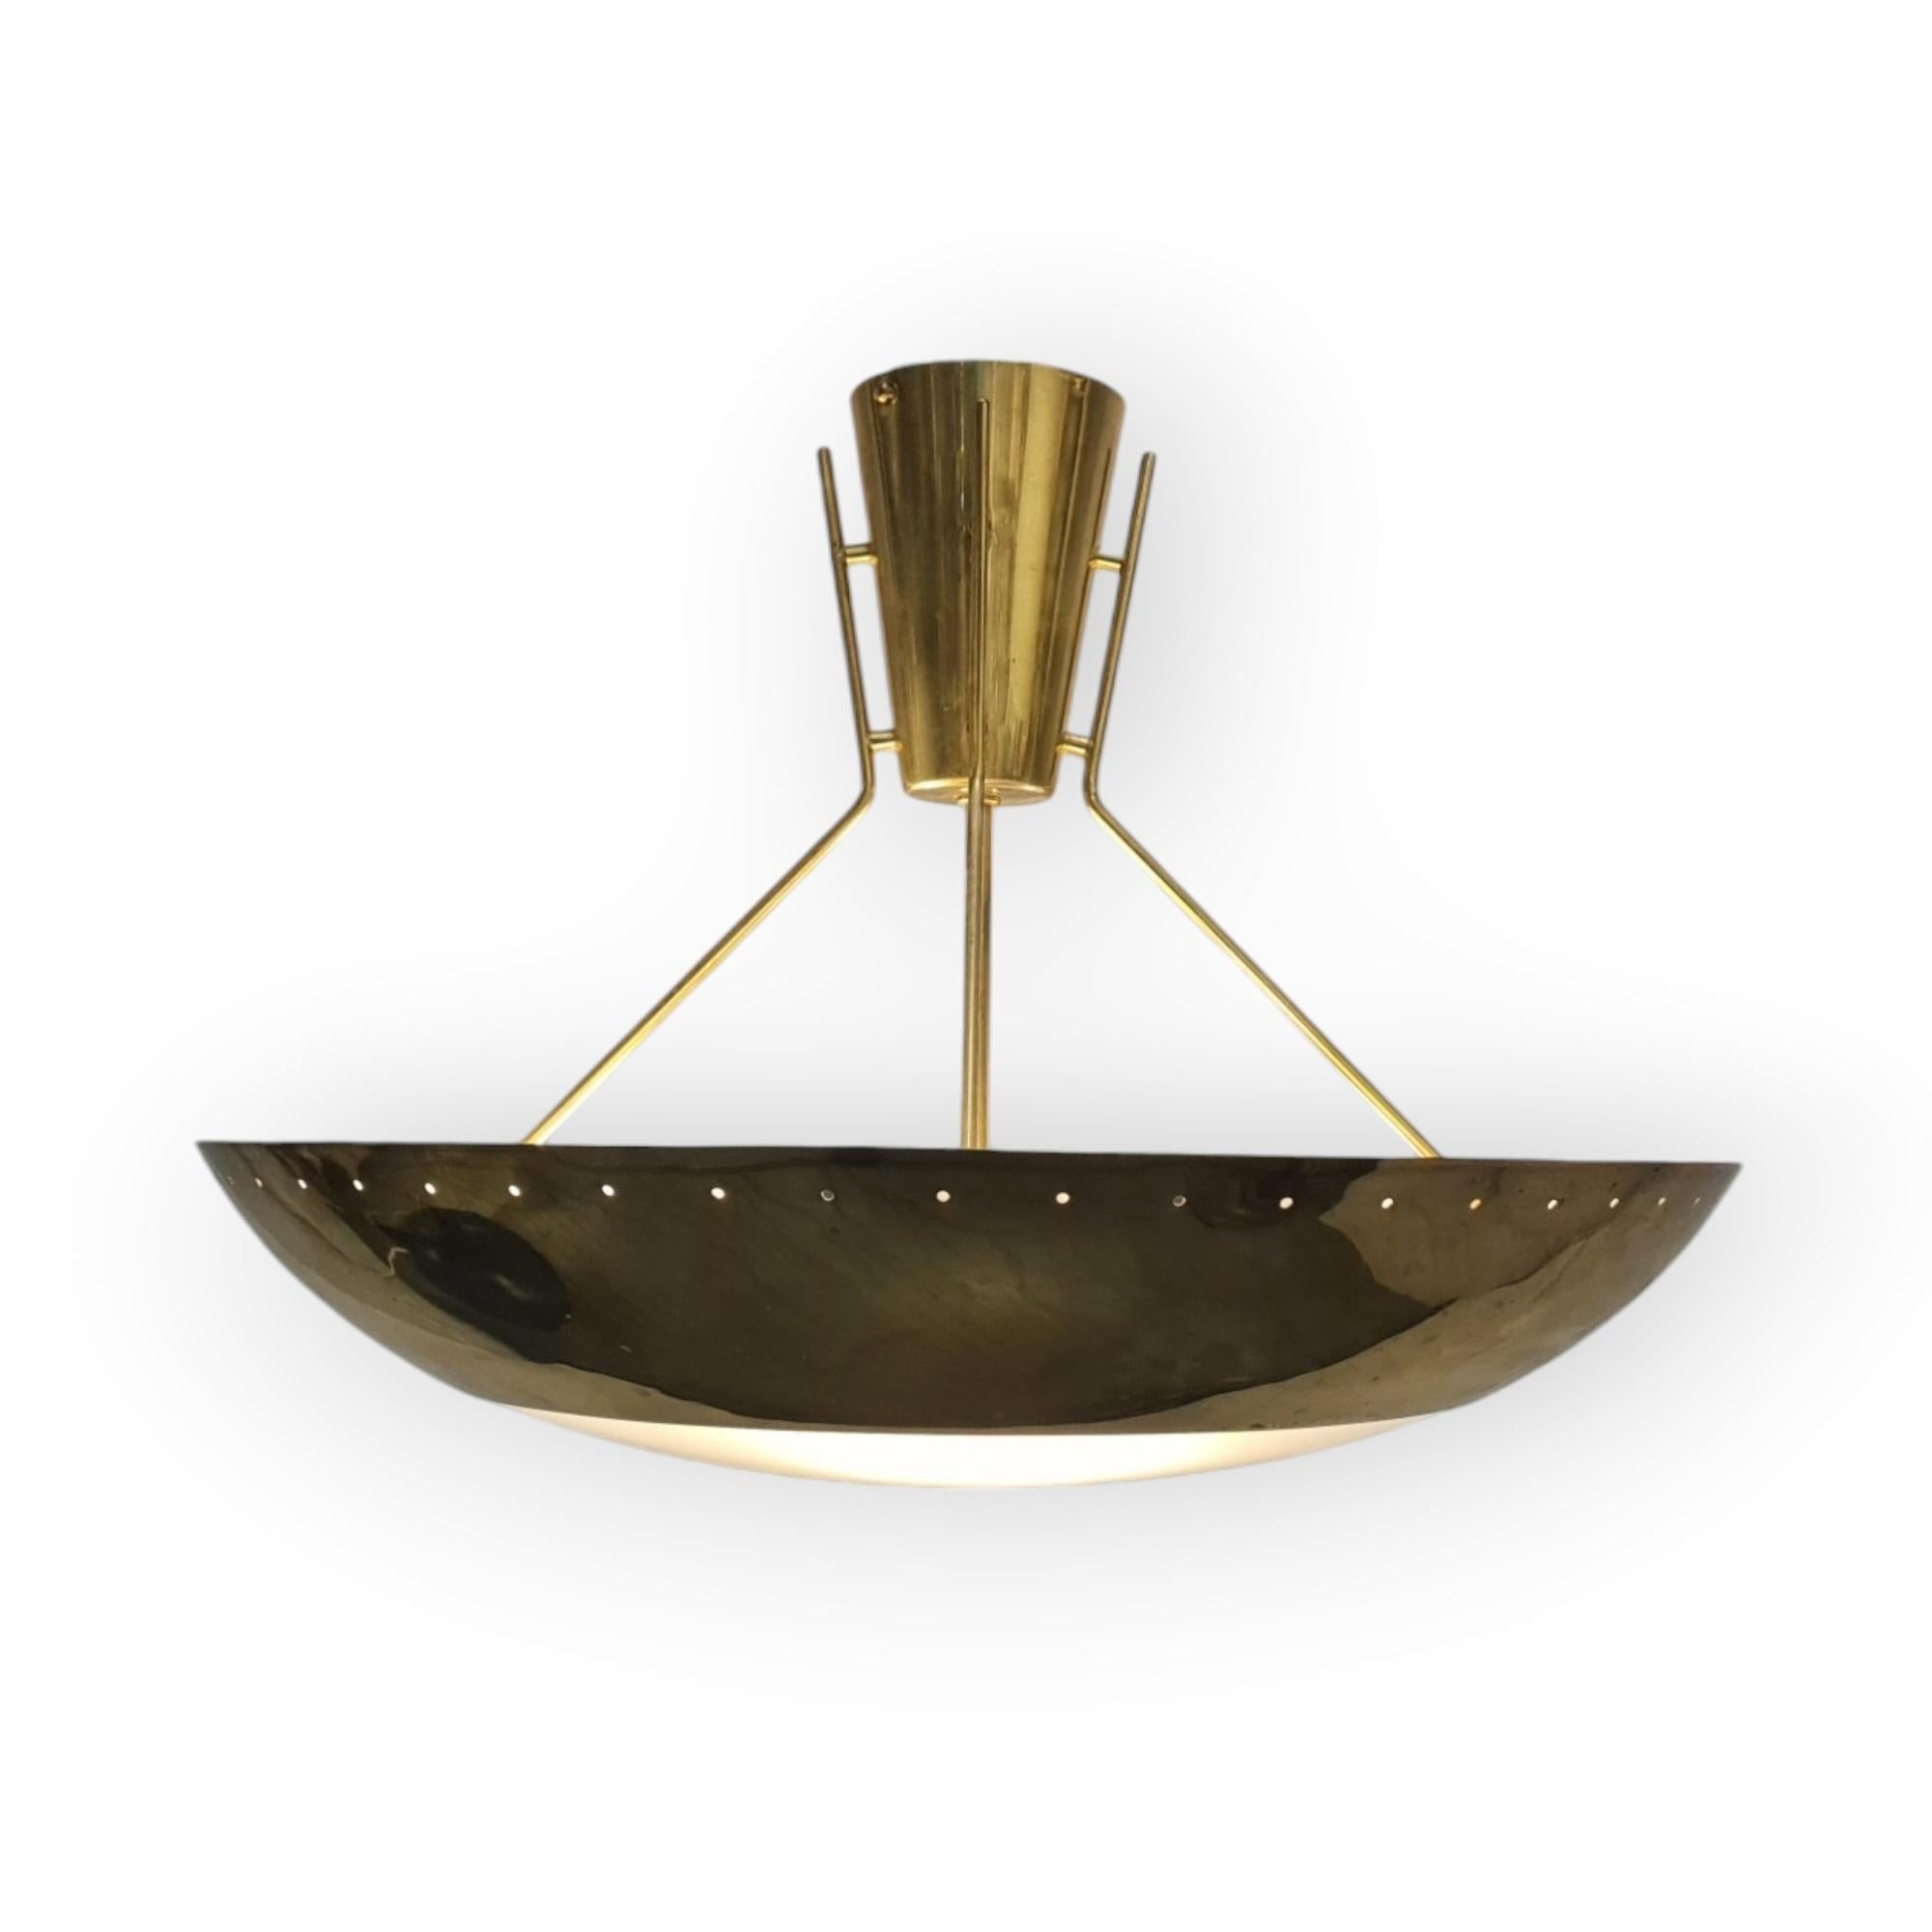 An absolutely beautiful ceiling lamp in brass, manufacutred by Itsu in Finland in the 1960s. Itsu was one of the leading lamp manufacturers in Finland during the middle of the 20th century. Along with companies like Taito Oy, Idman and Orno they